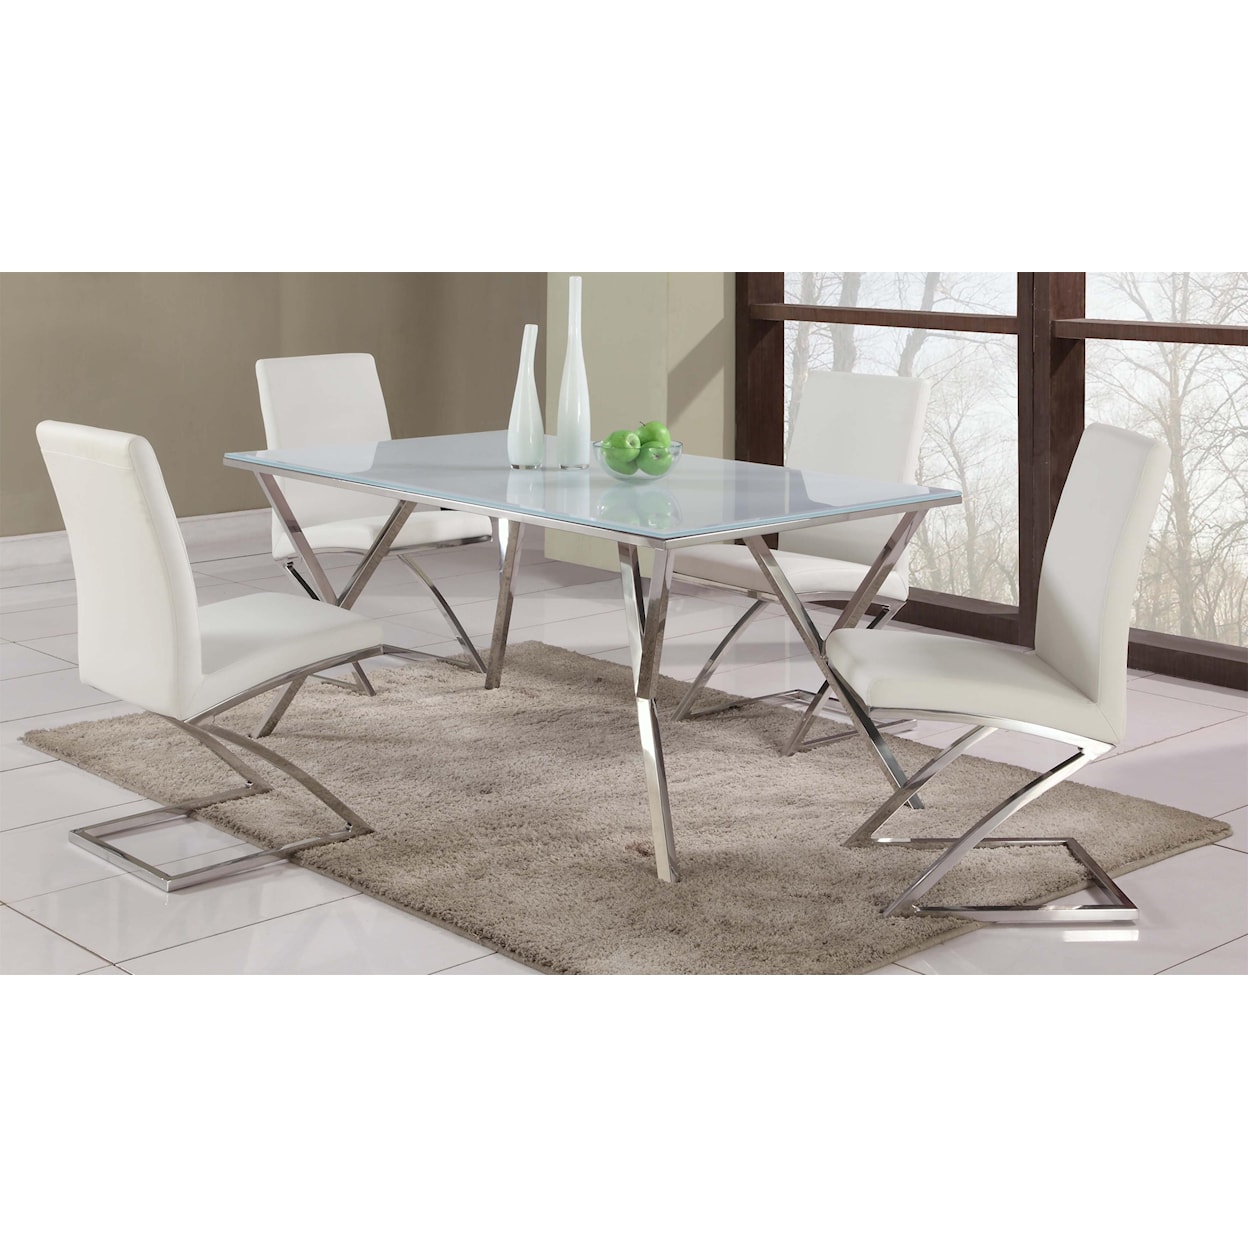 Chintaly Imports Jade Starphire Glass Top Dining Table